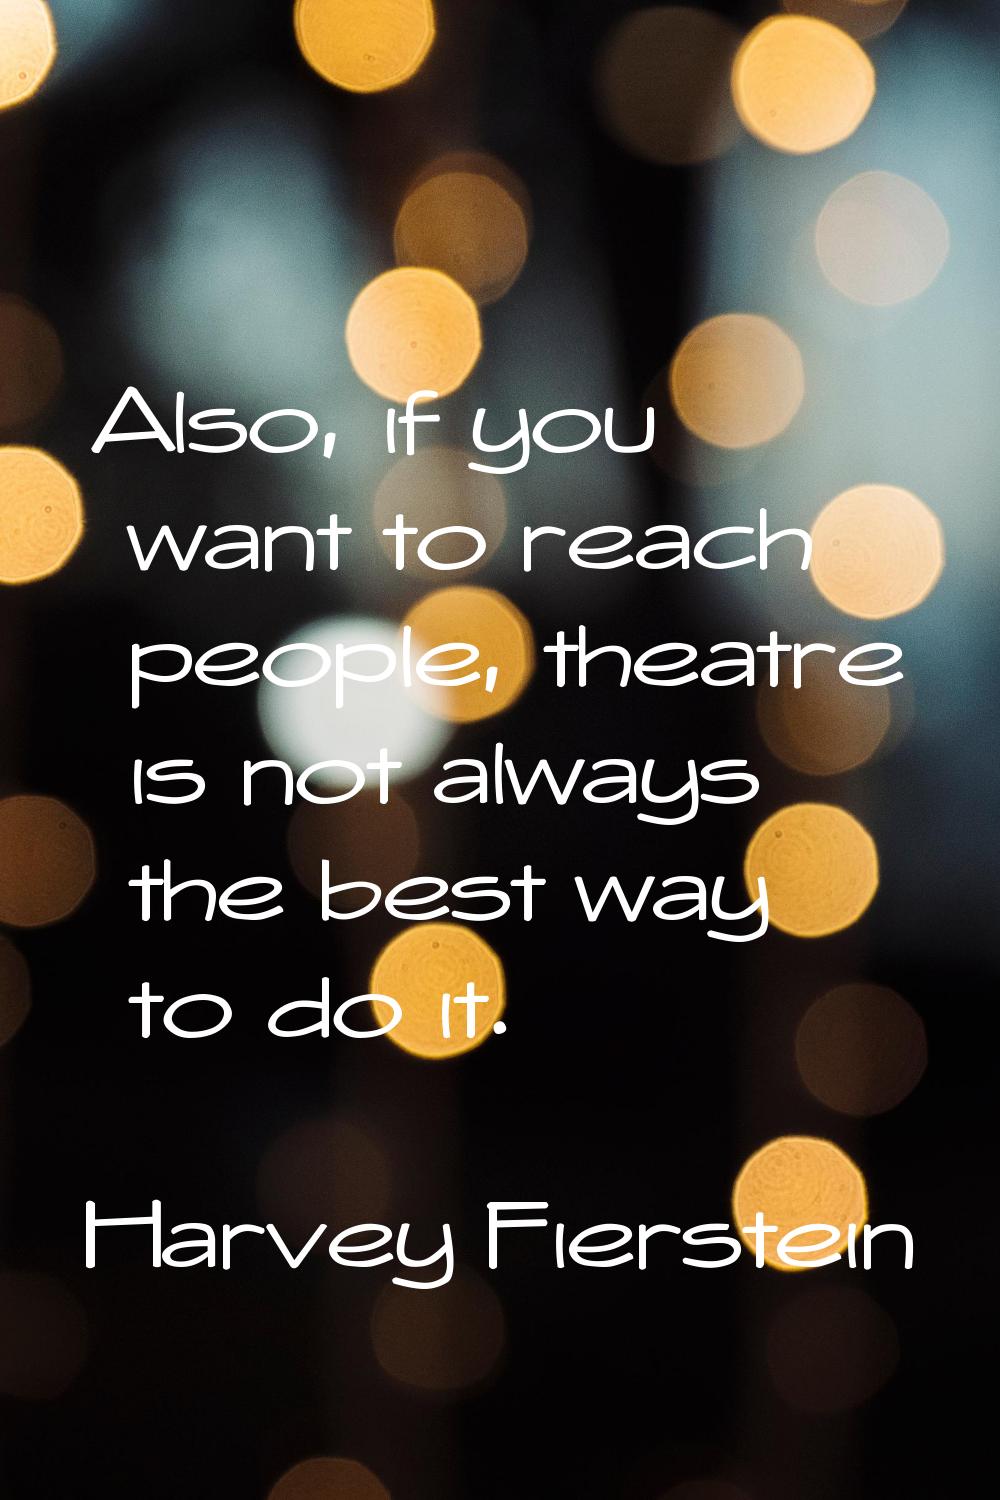 Also, if you want to reach people, theatre is not always the best way to do it.